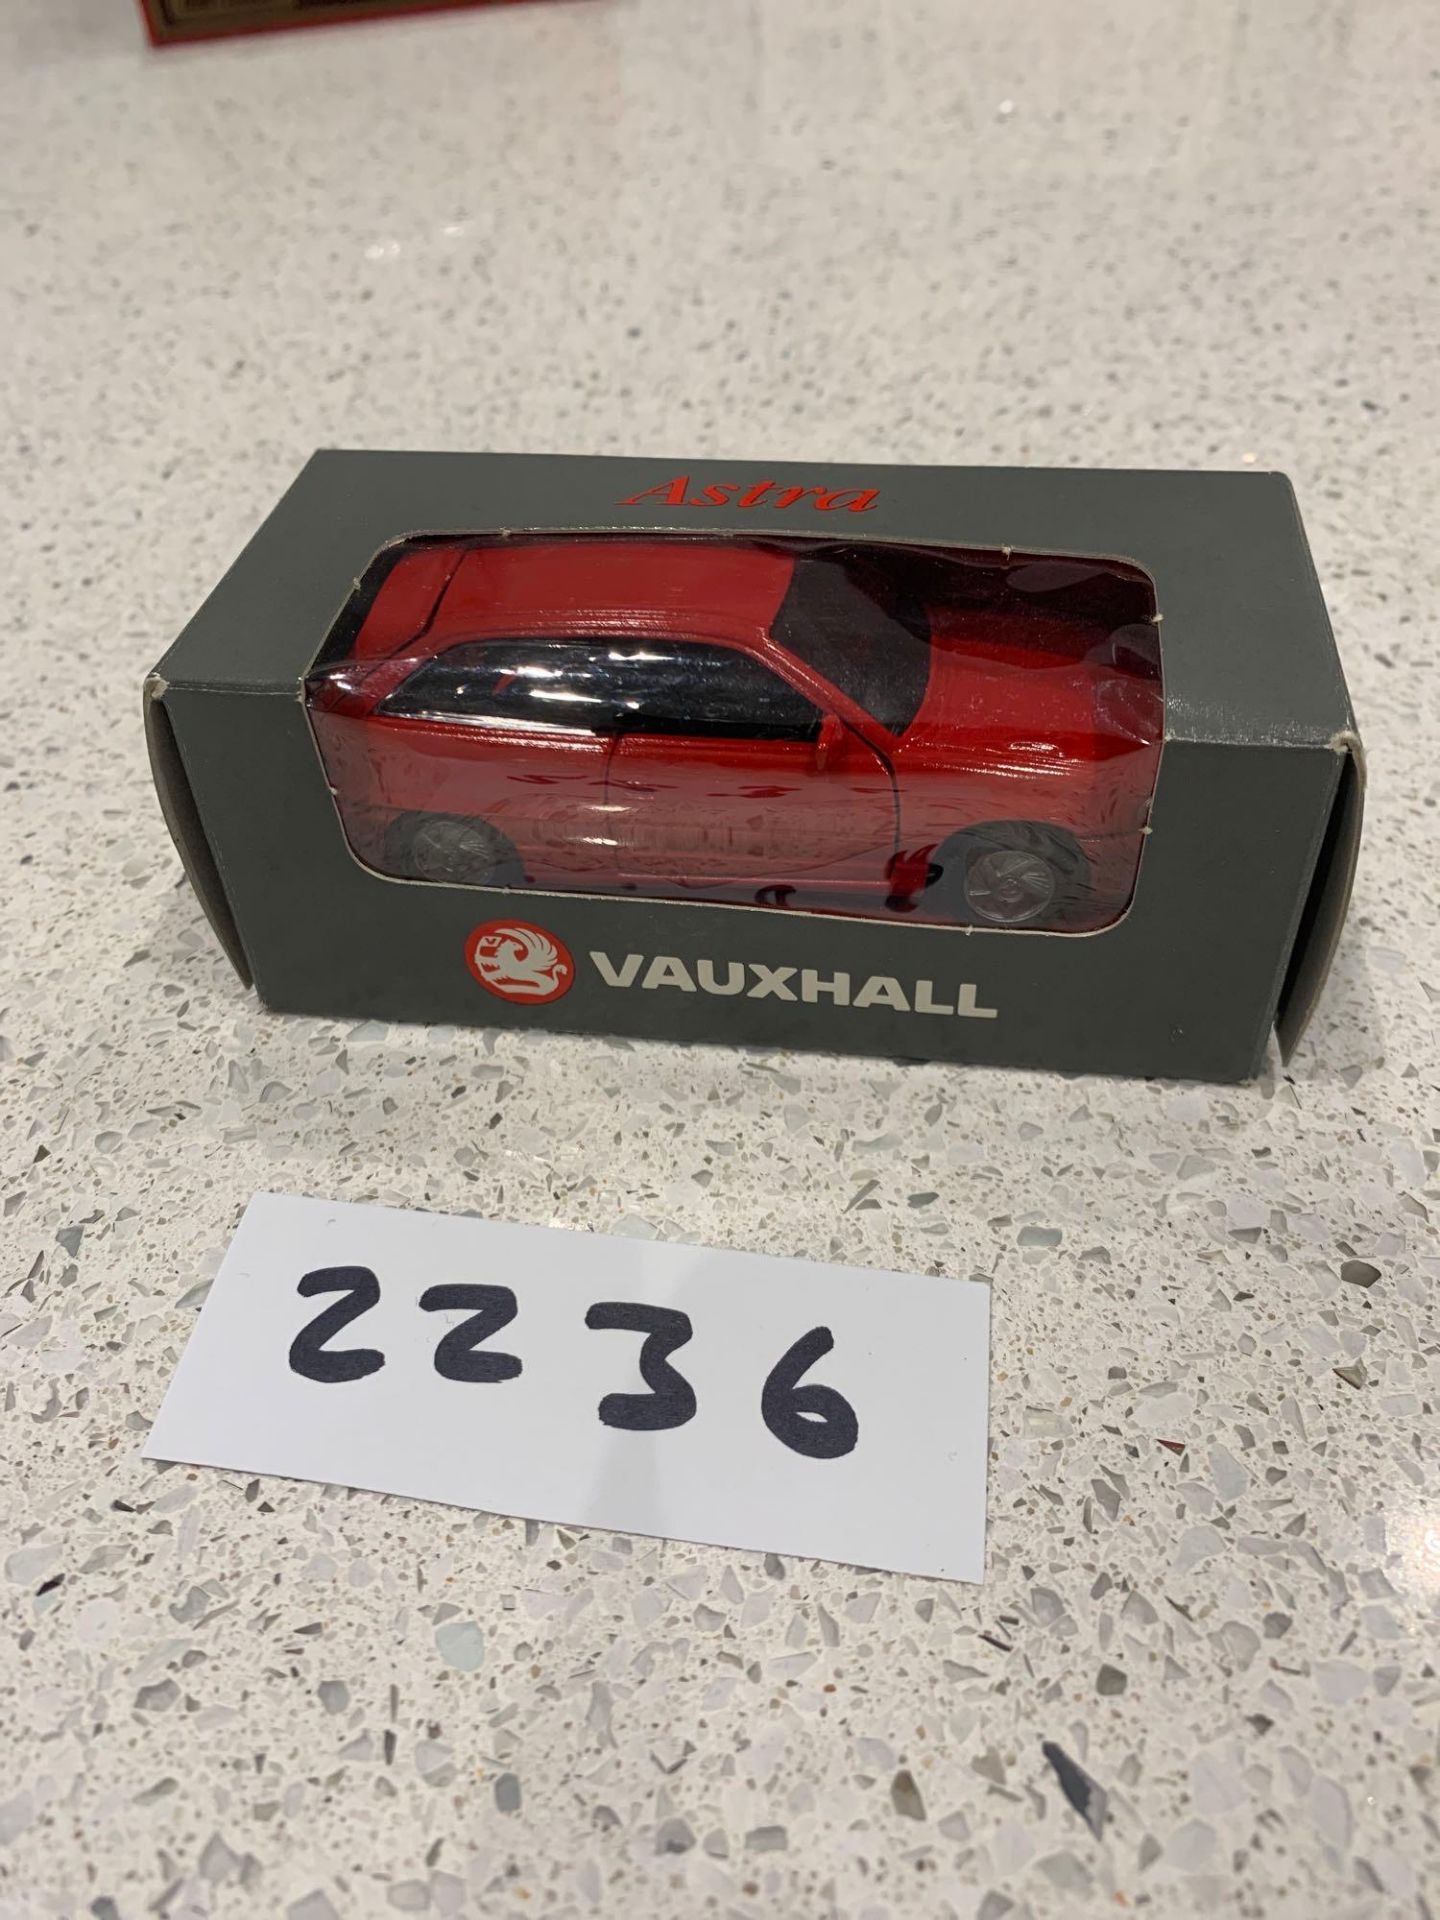 Gama Vauxhall Astra boxed 1:43 scale Dealers Model Red Made In Germany